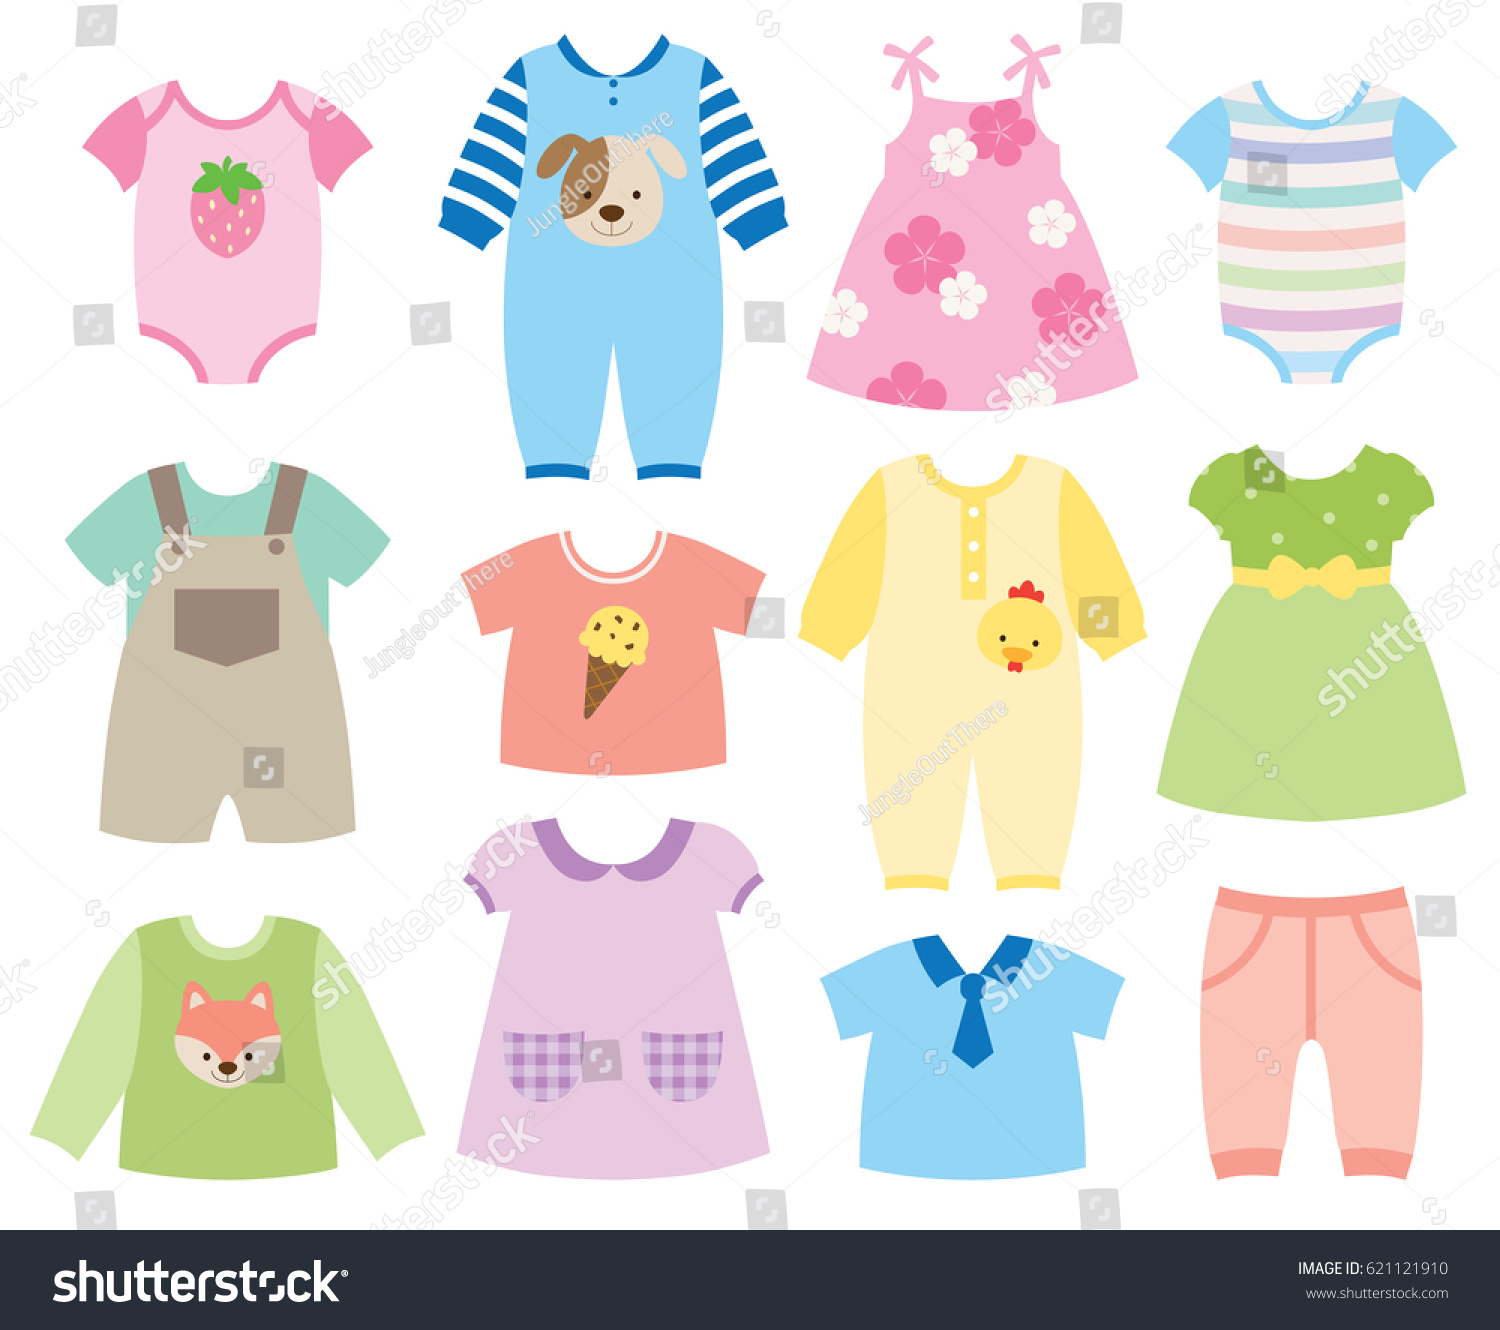 Baby clothes vector Images, Stock Photos & Vectors | Shutterstock